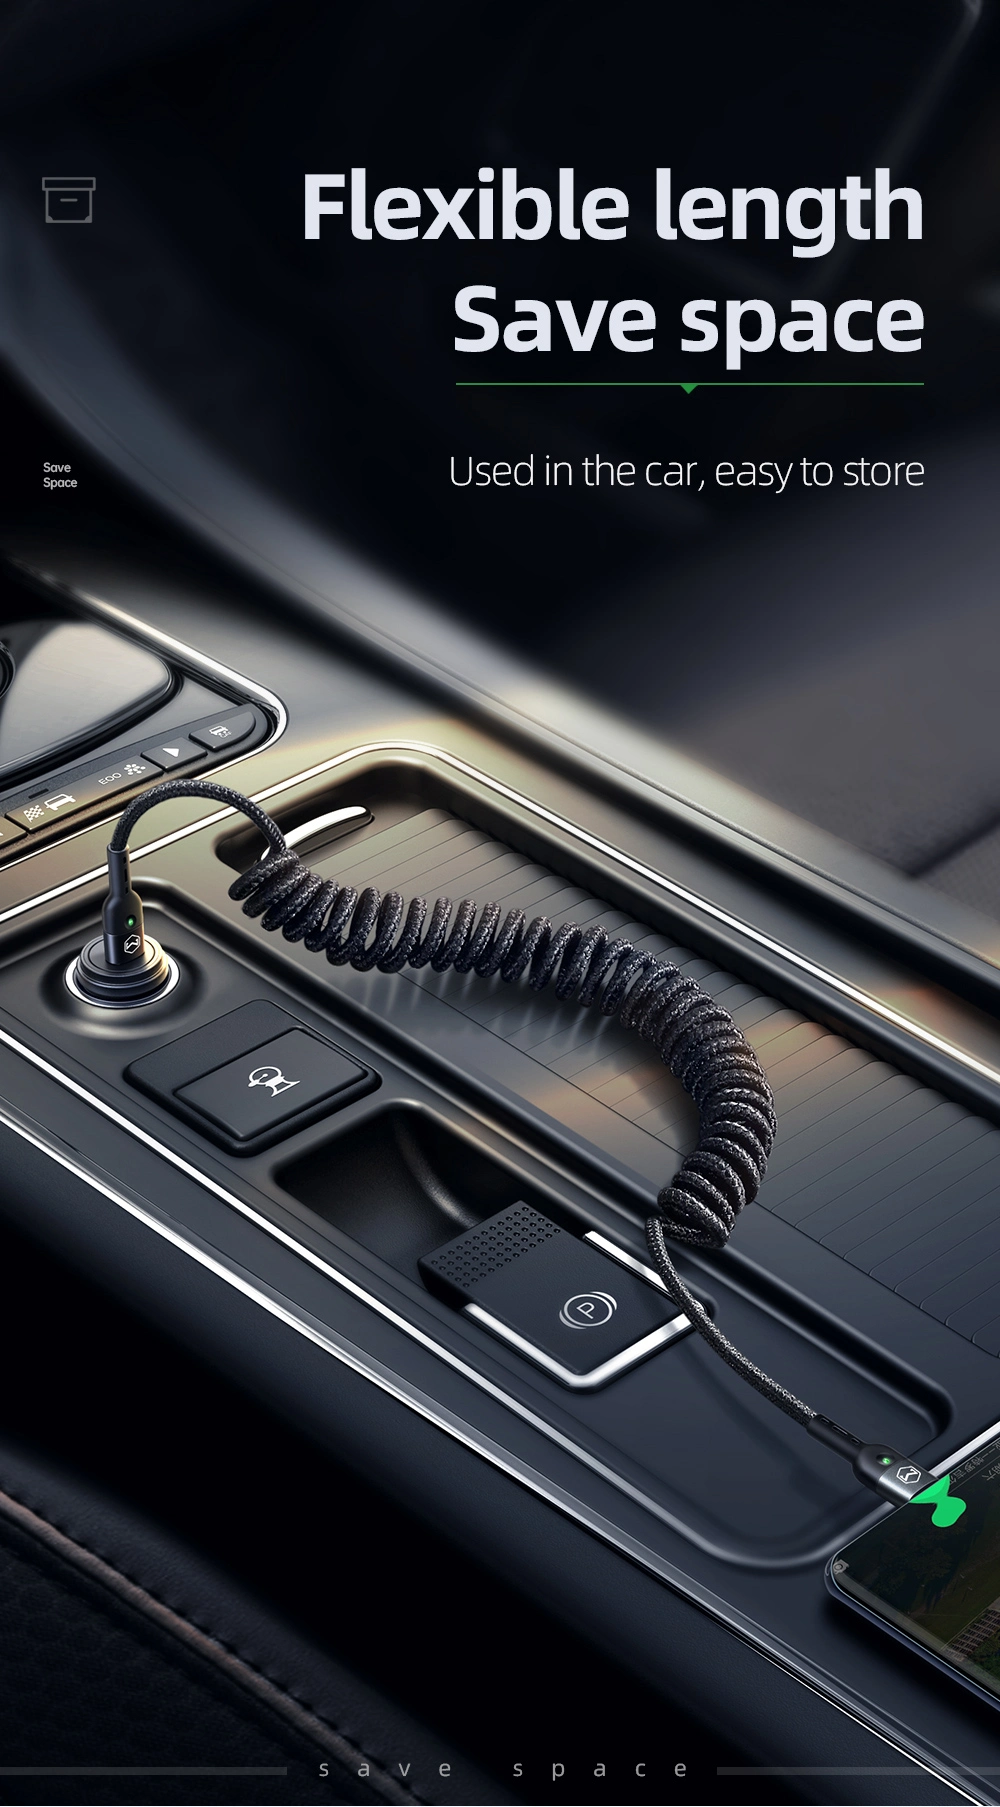 Mcdodo Retractable Car Spring USB C to USB Type-C Cable